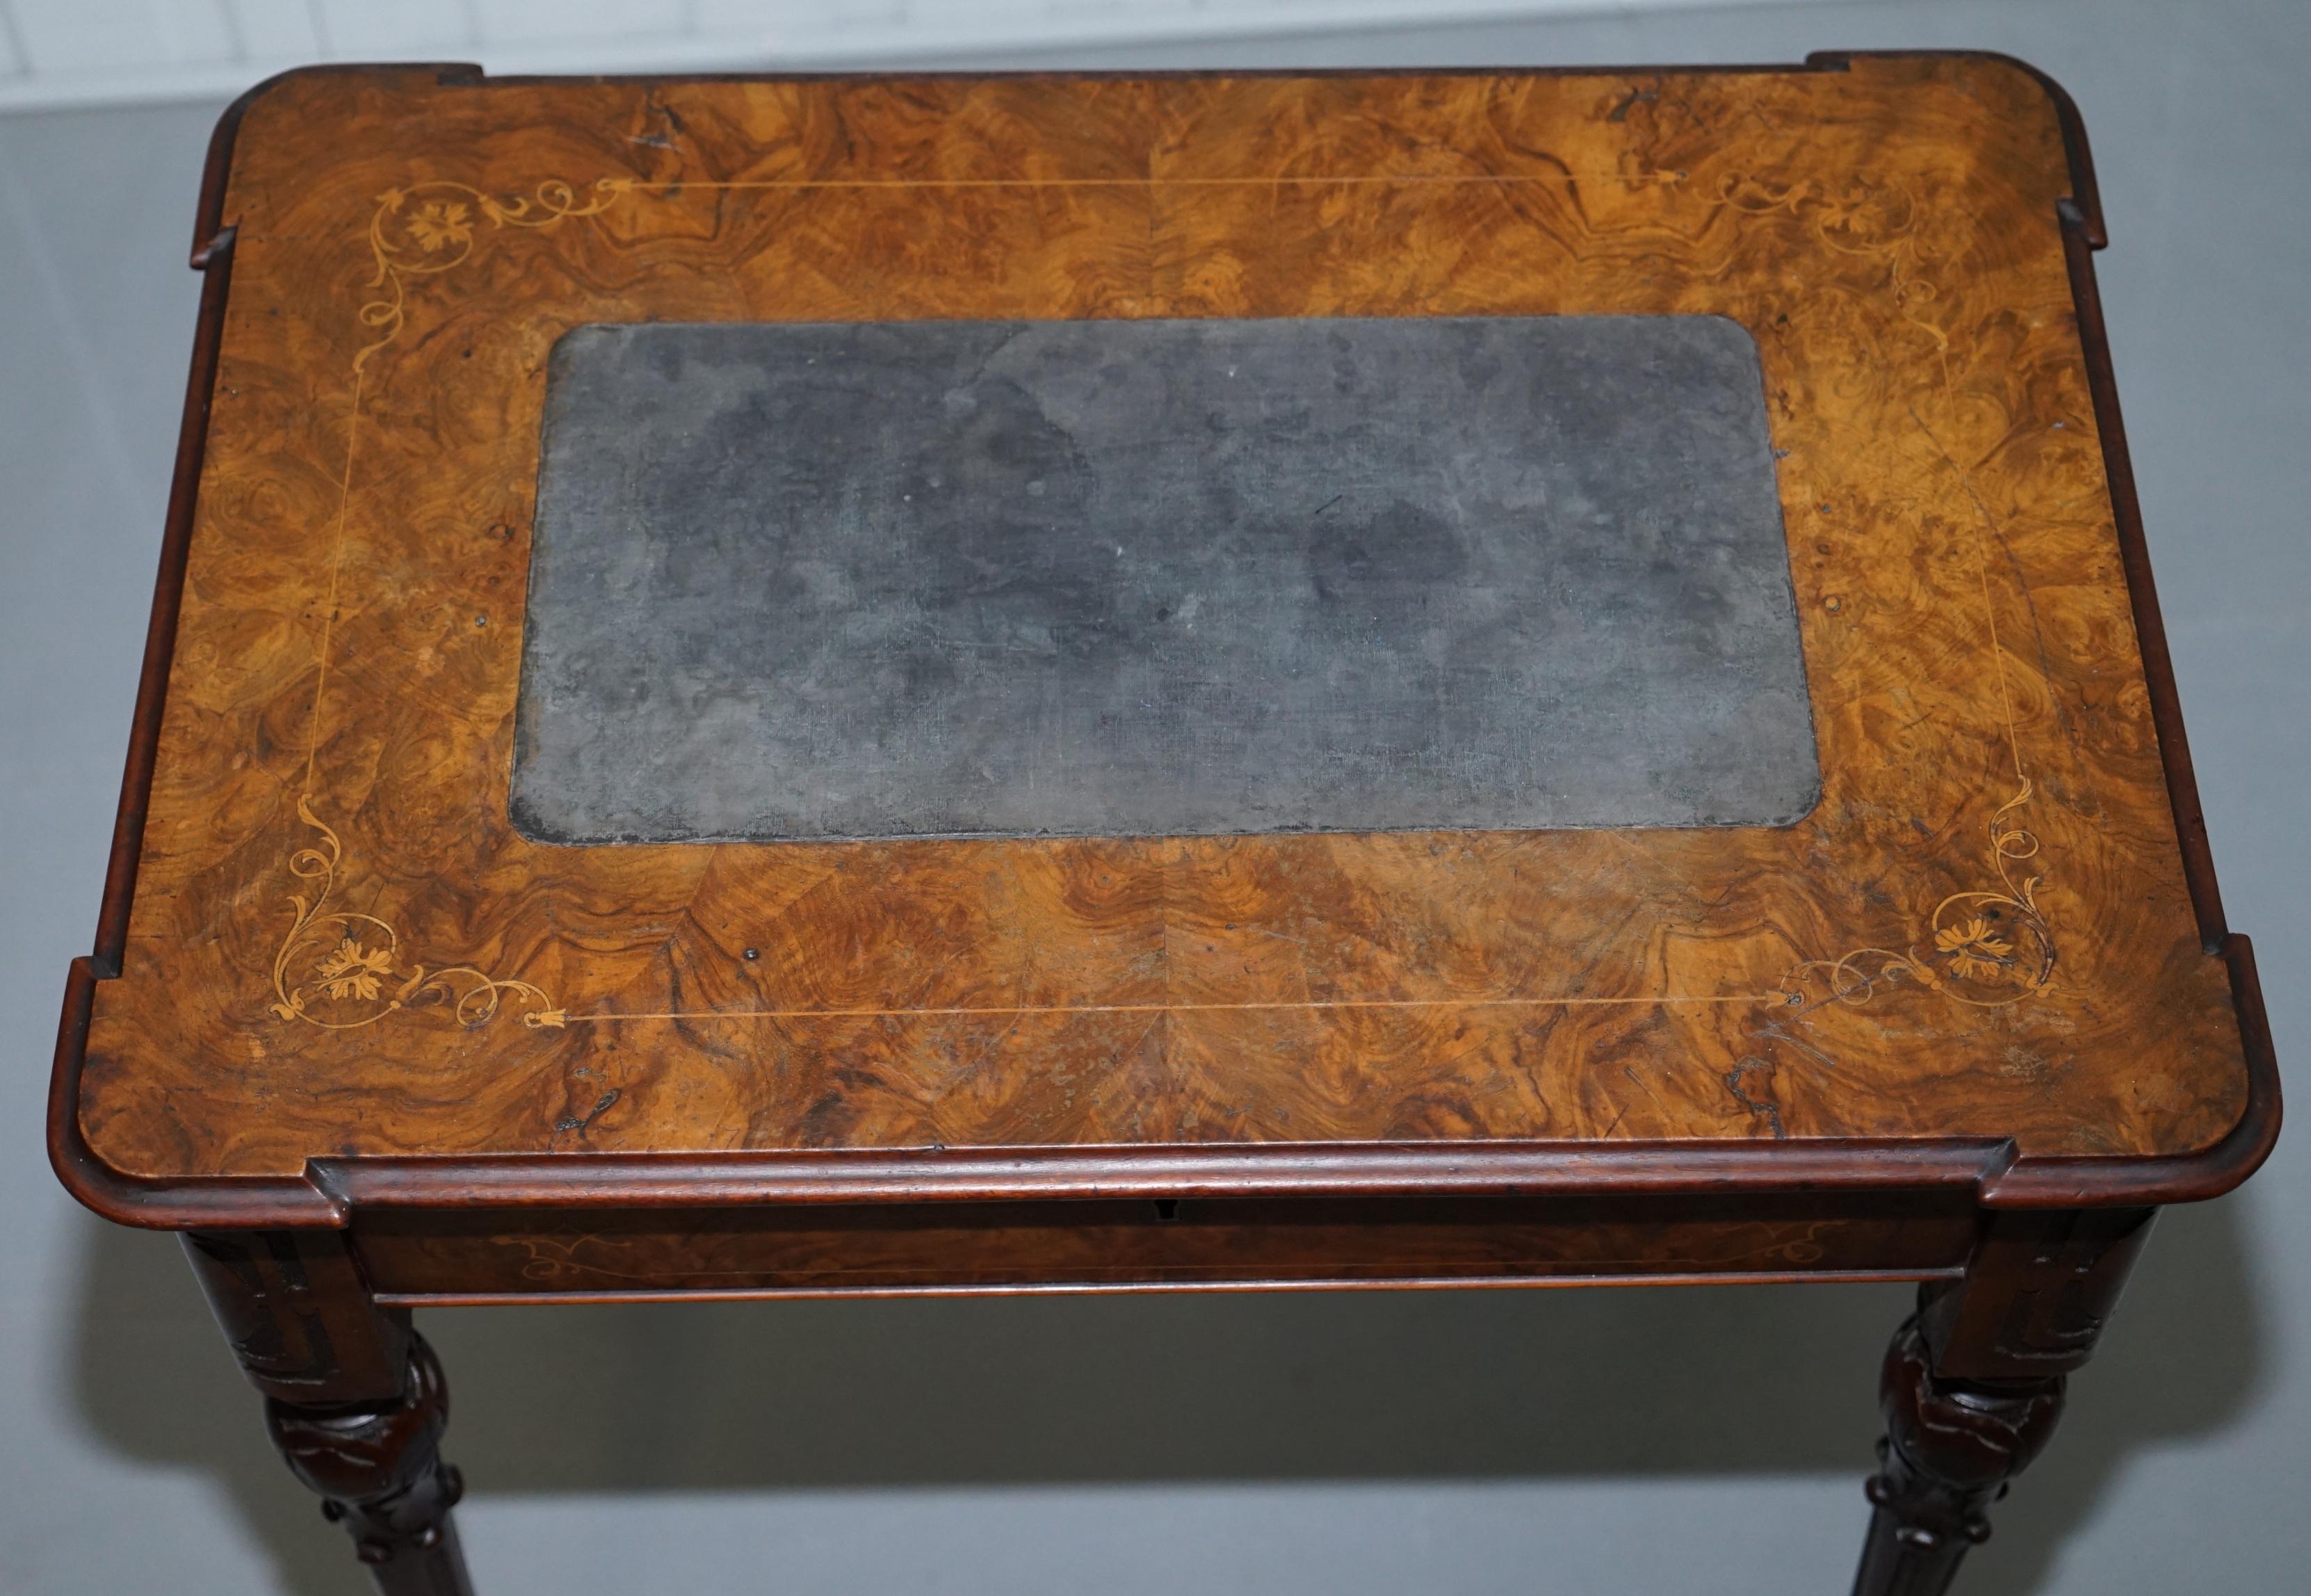 British Stunning Rare Early Victorian Burr Walnut Games Table Lift Top Fret Work Carved